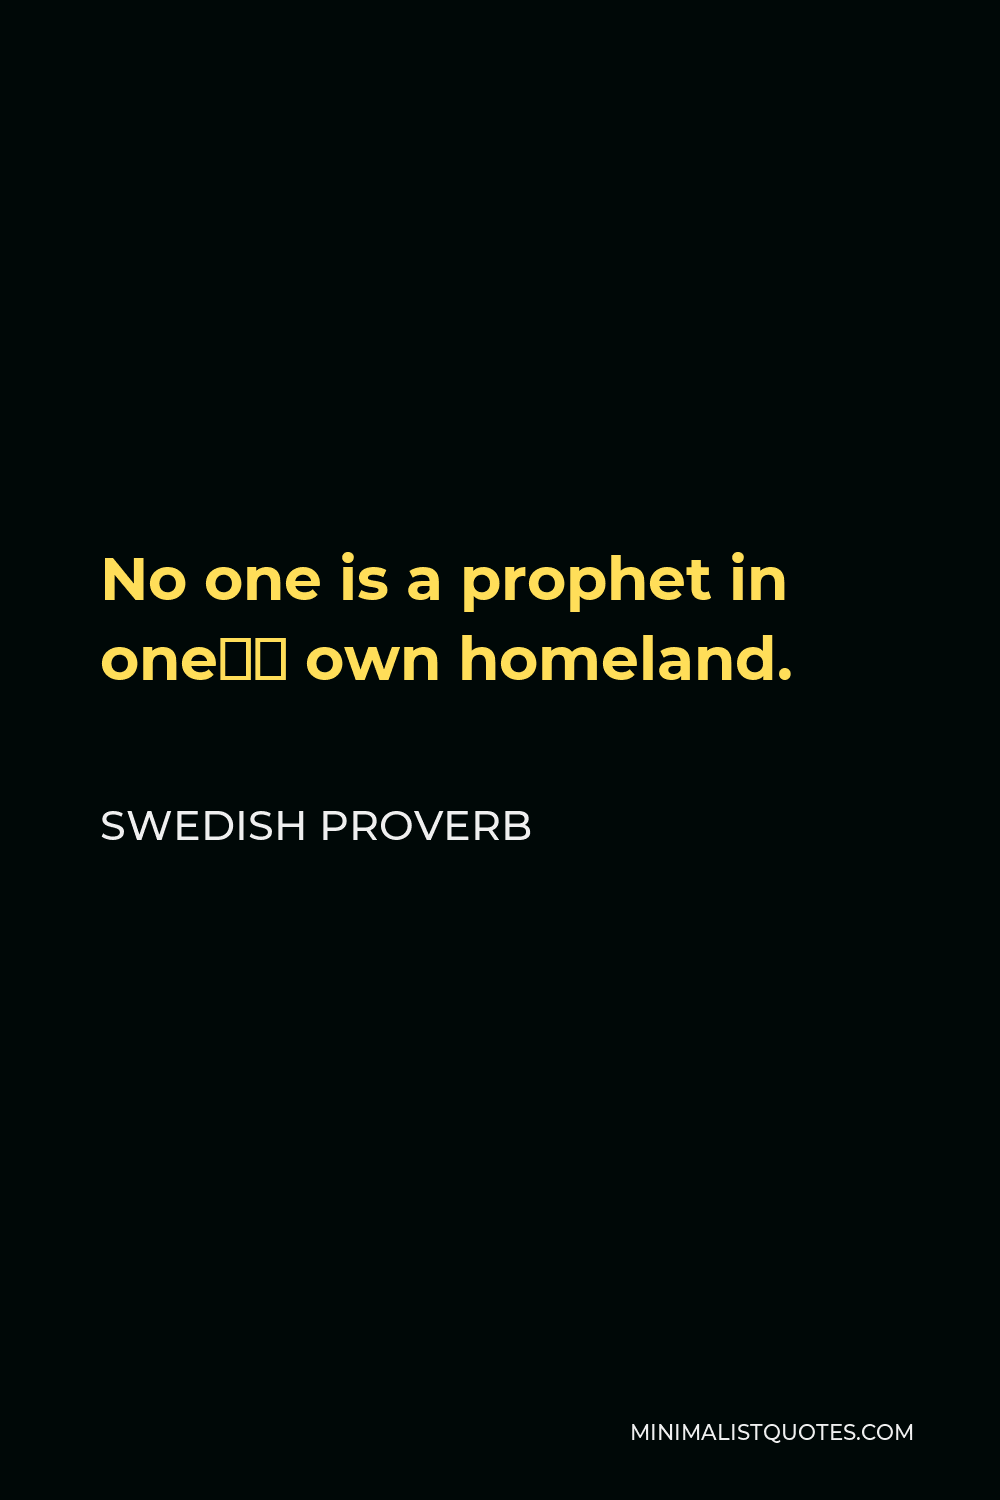 Swedish Proverb Quote - No one is a prophet in one’s own homeland.